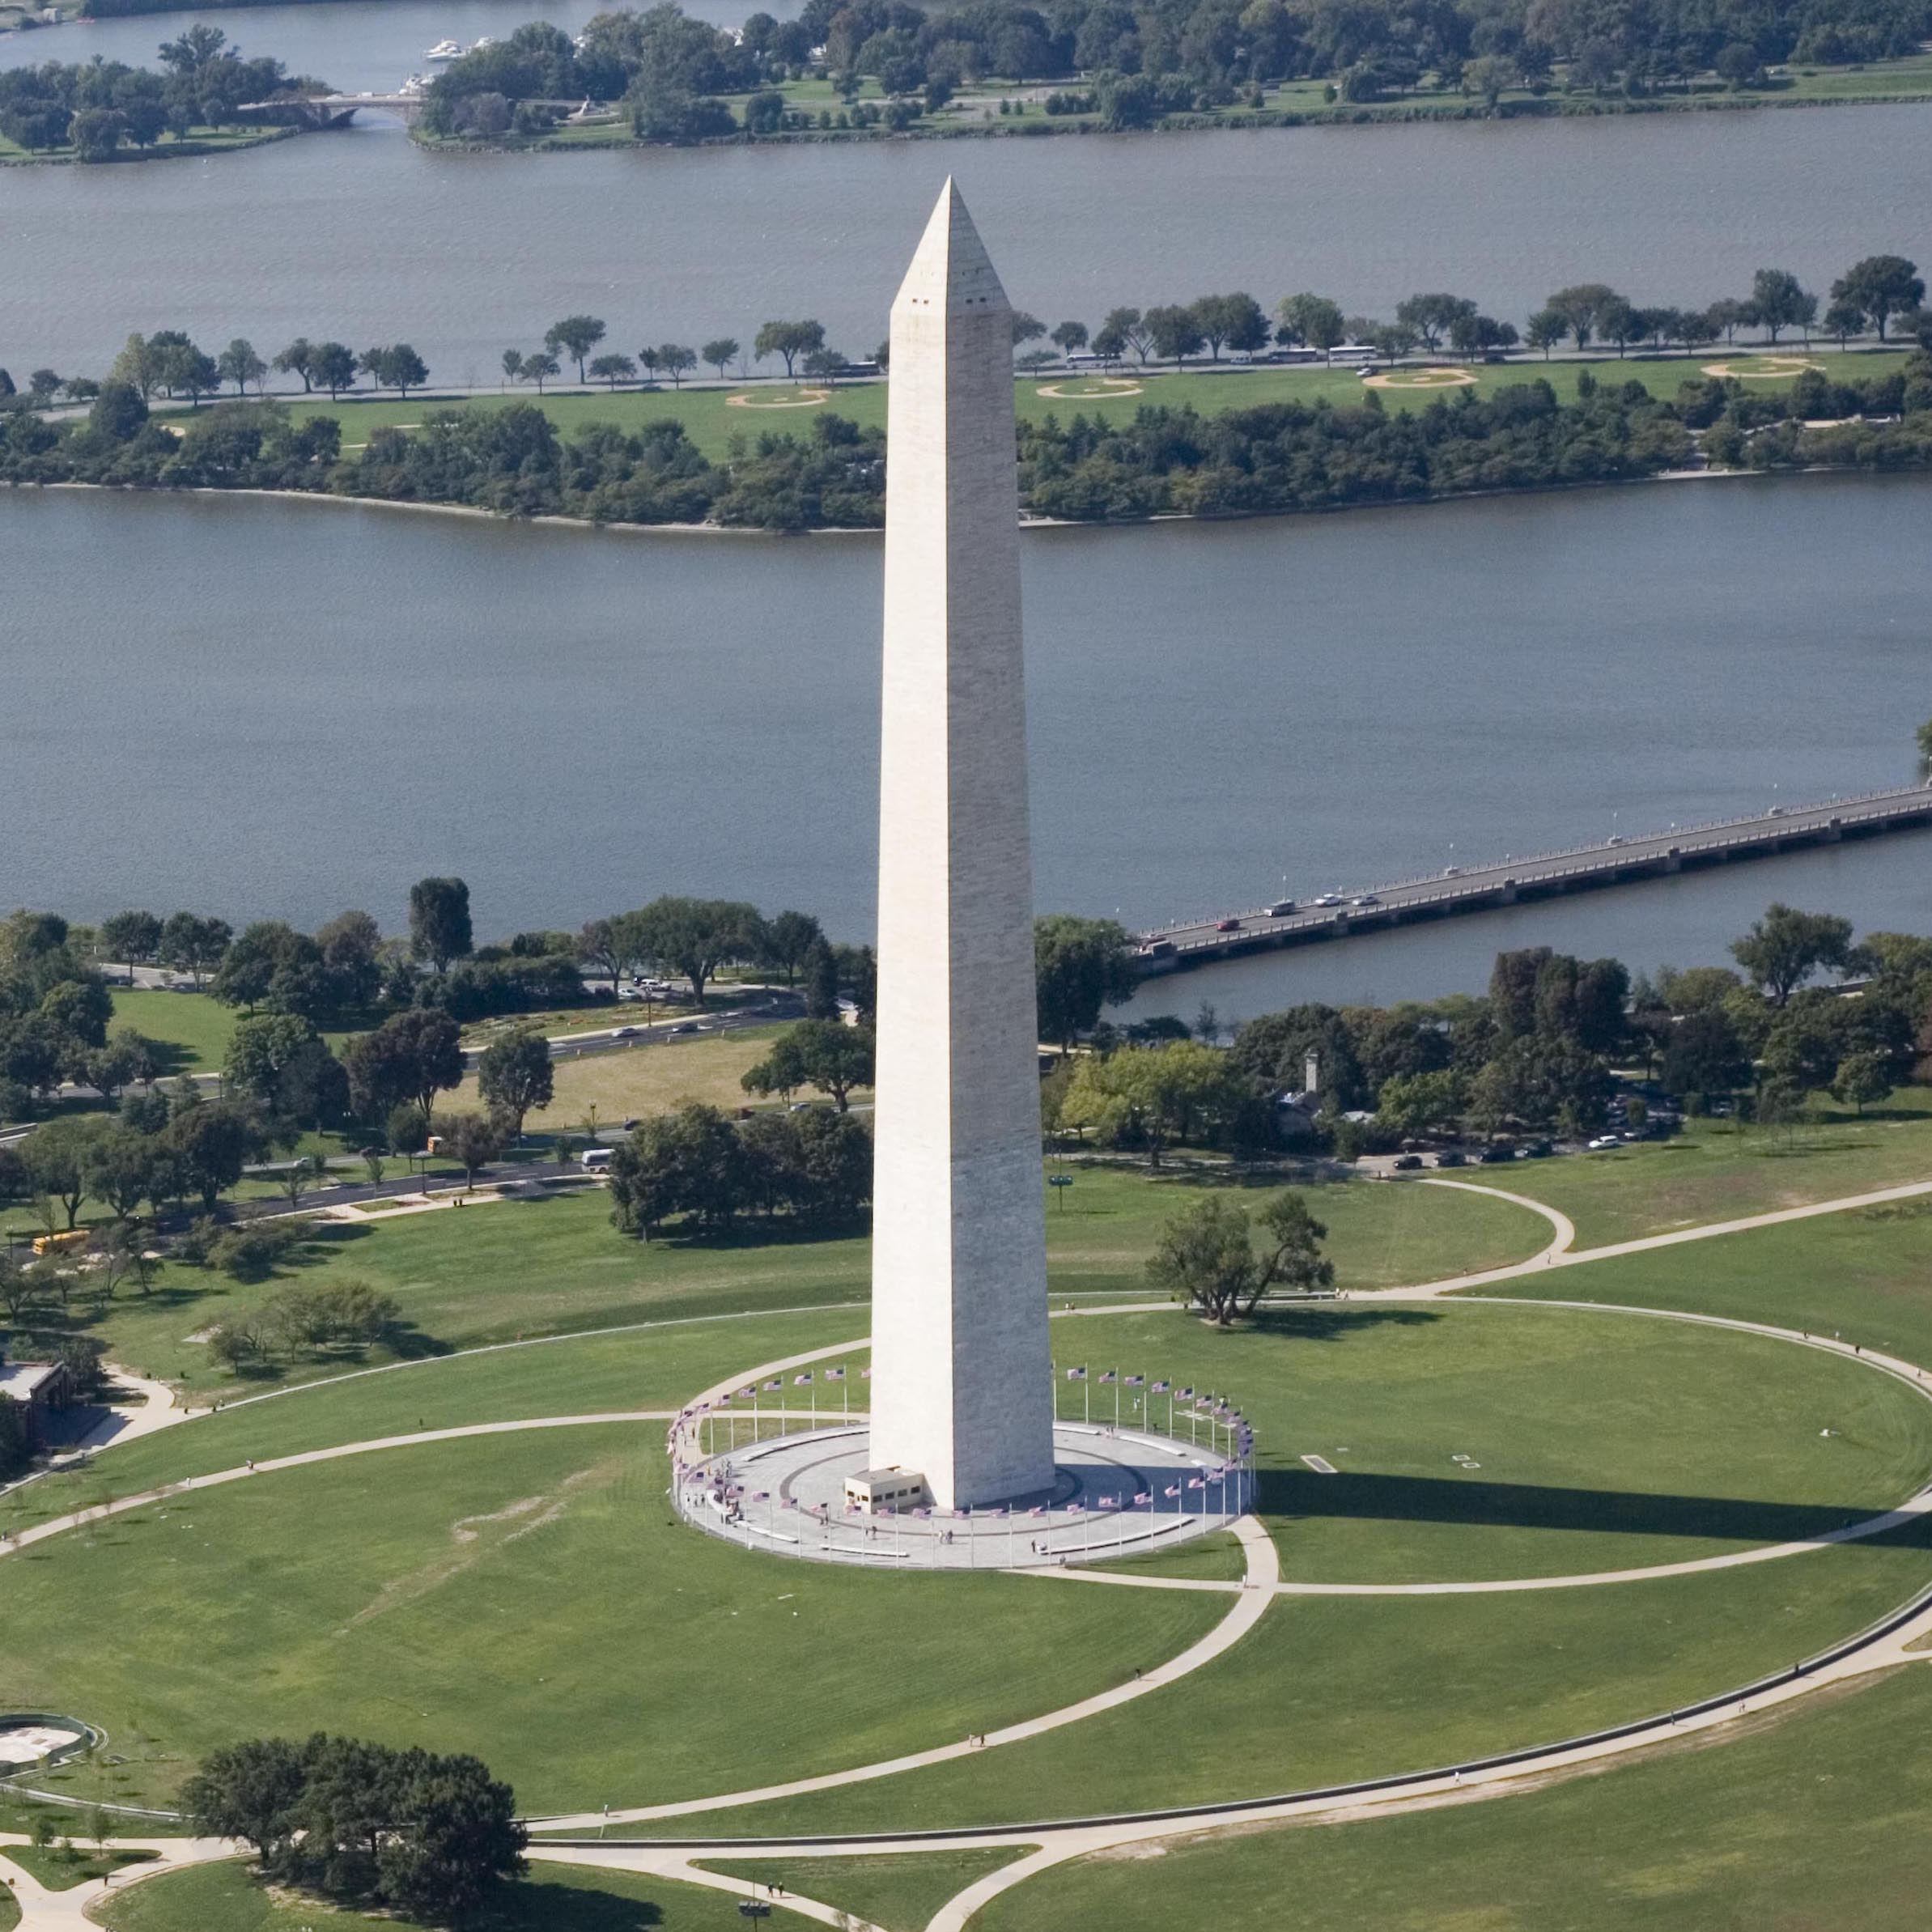 A Visitors Guide to the Washington Monument | Free Tours by Foot